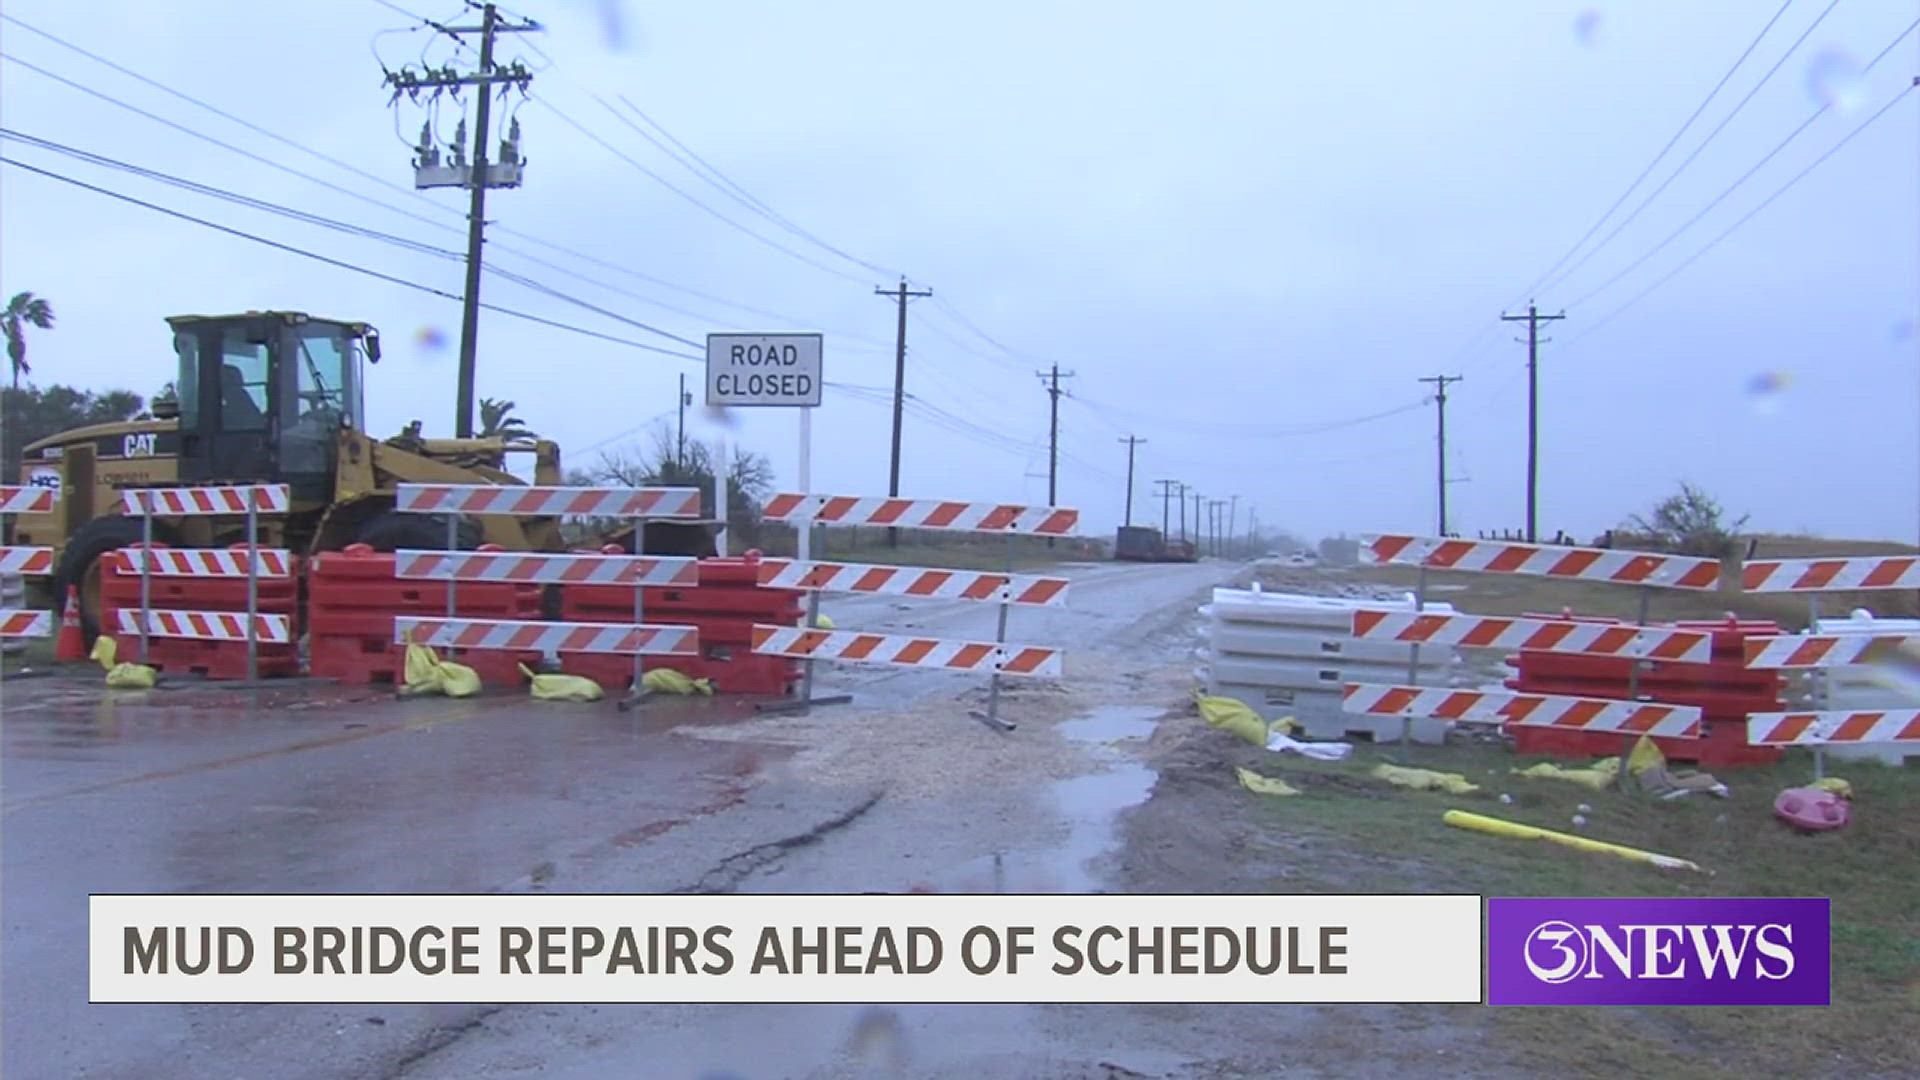 A sinkhole that uncovered structural damage under the bridge has left the area without direct access from Flour Bluff to mainland Corpus Christi since December.